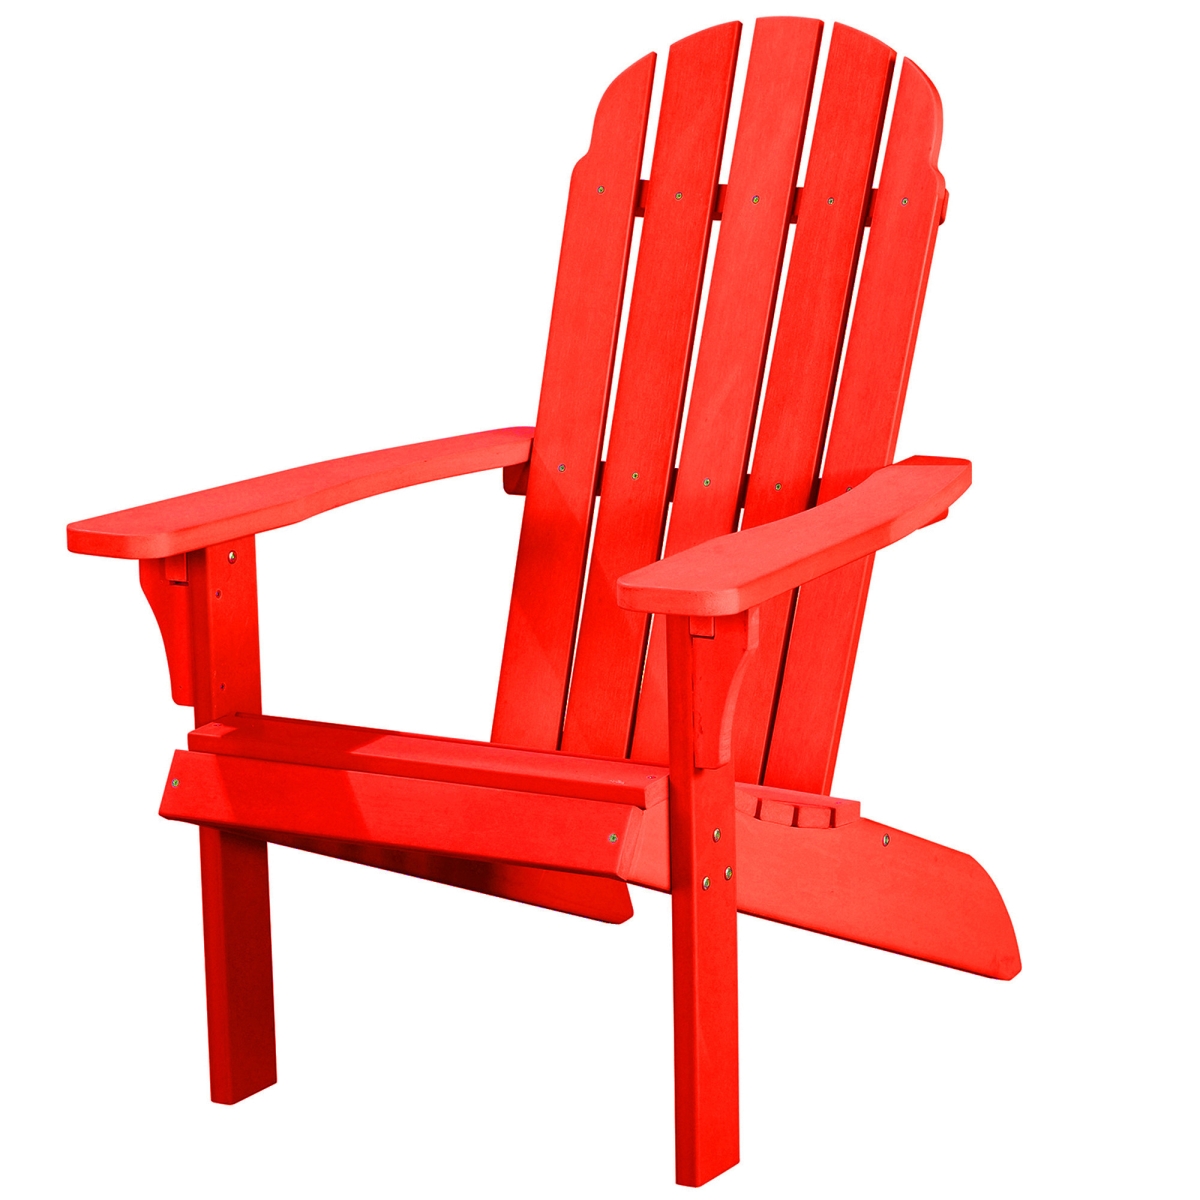 HomeRoots 483881 27 in. Red Heavy Duty Plastic Adirondack Chair